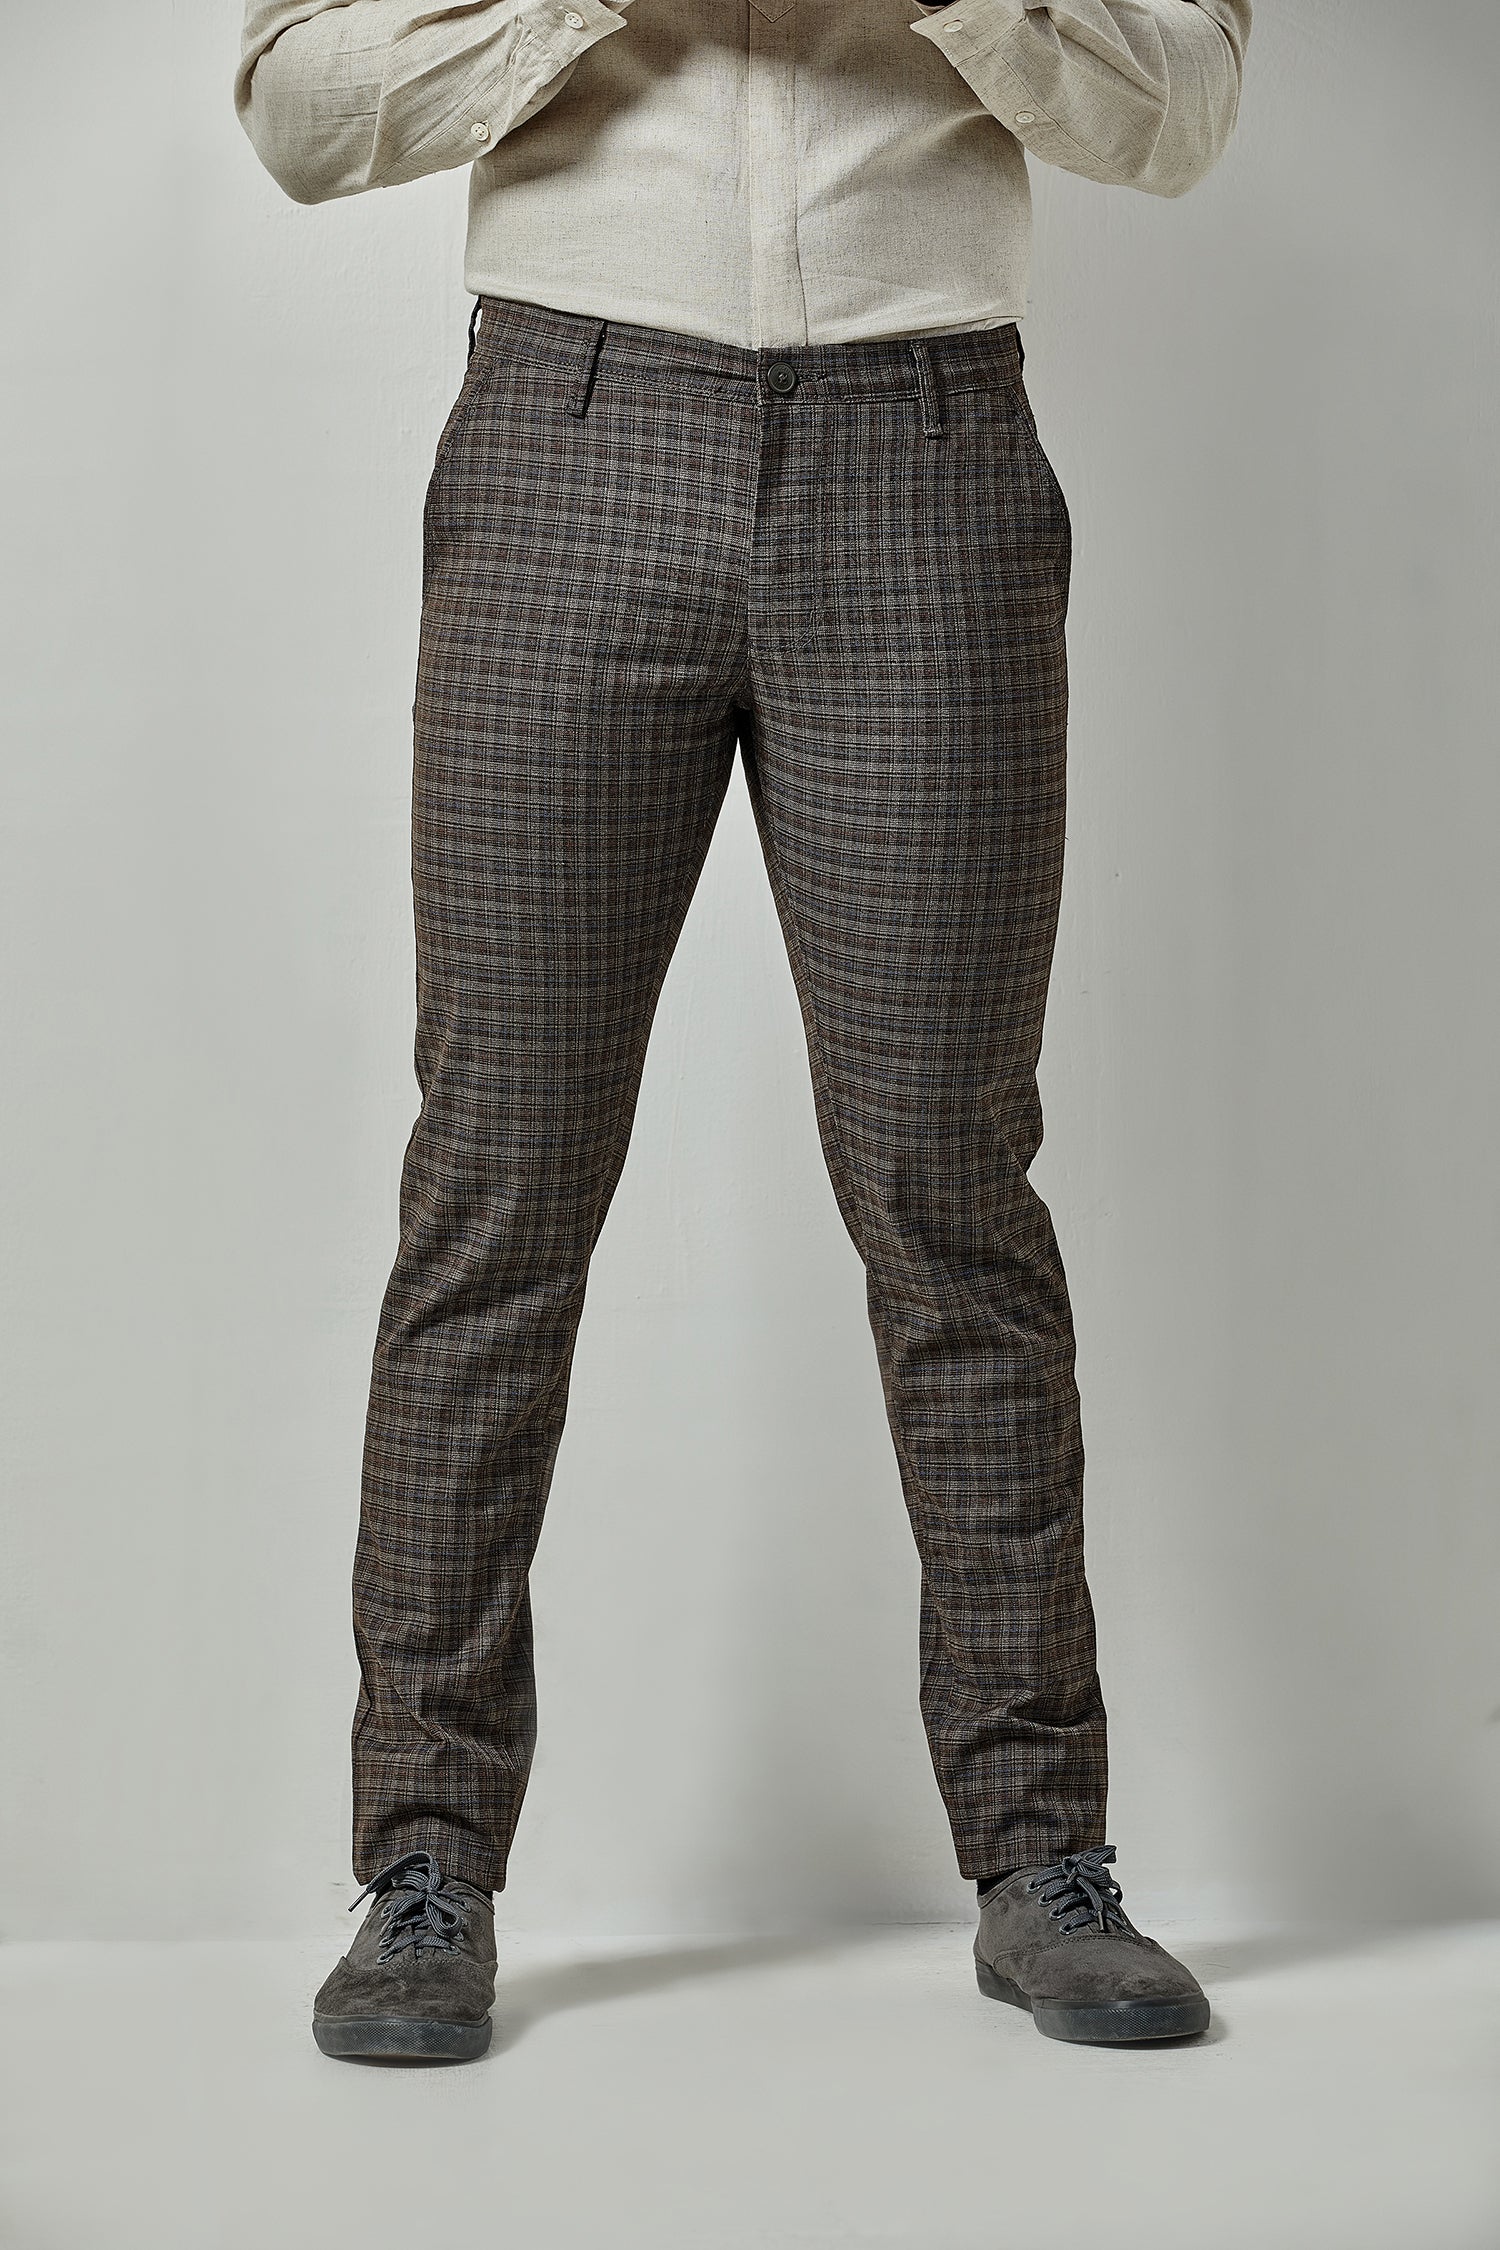 Men Plaid Pants Slim Fit Skinny Trousers Casual Business Formal Check  Trousers | eBay